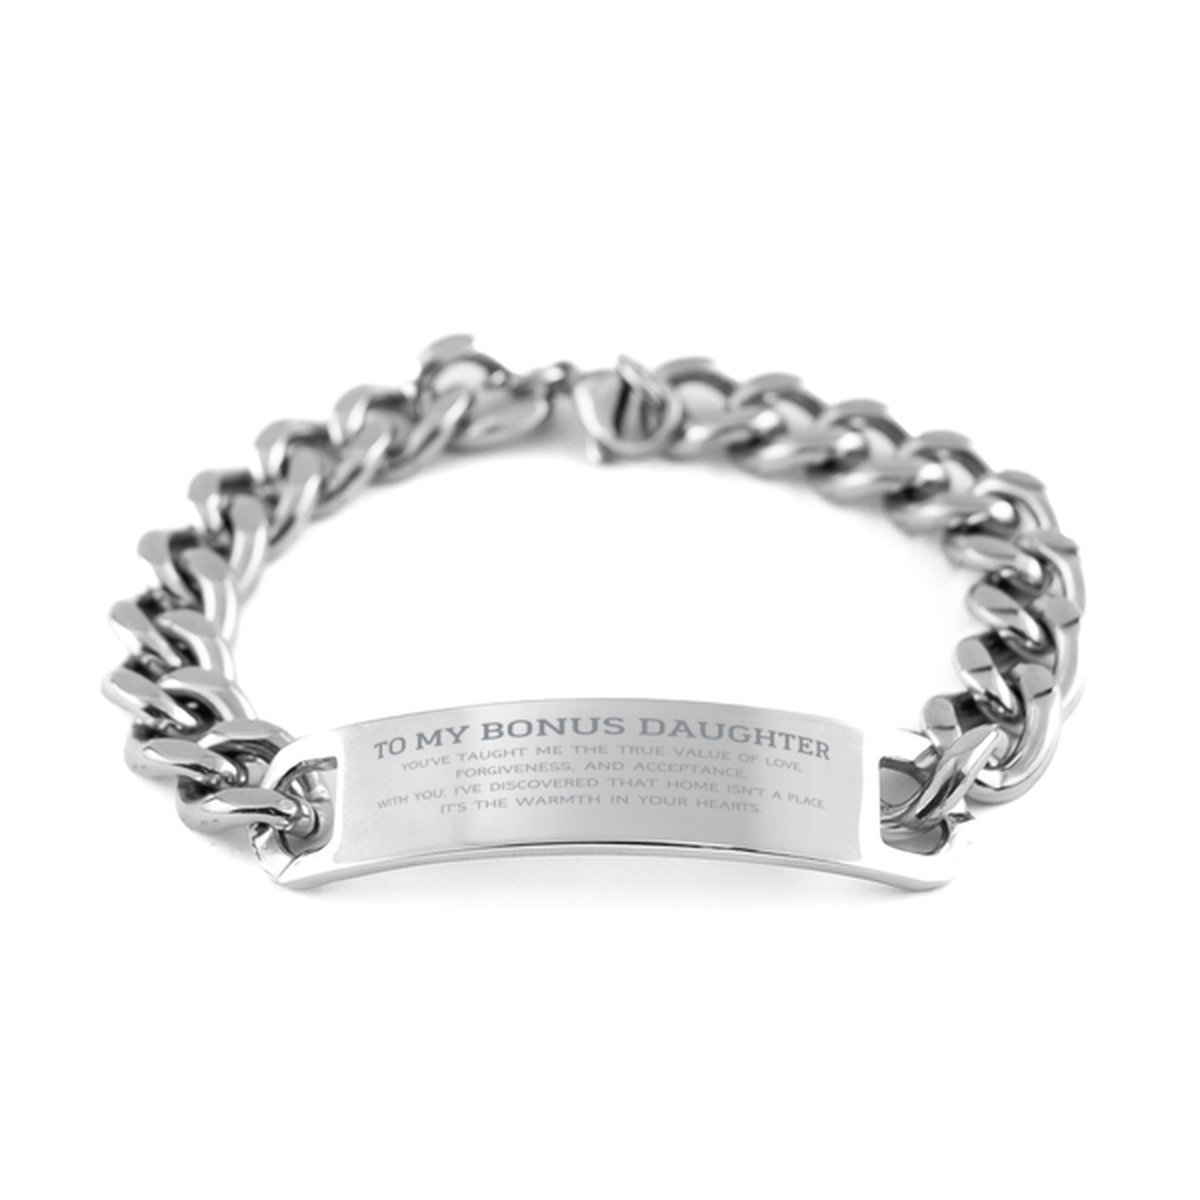 To My Bonus Daughter Gifts, You've taught me the true value of love, Thank You Gifts For Bonus Daughter, Birthday Cuban Chain Stainless Steel Bracelet For Bonus Daughter